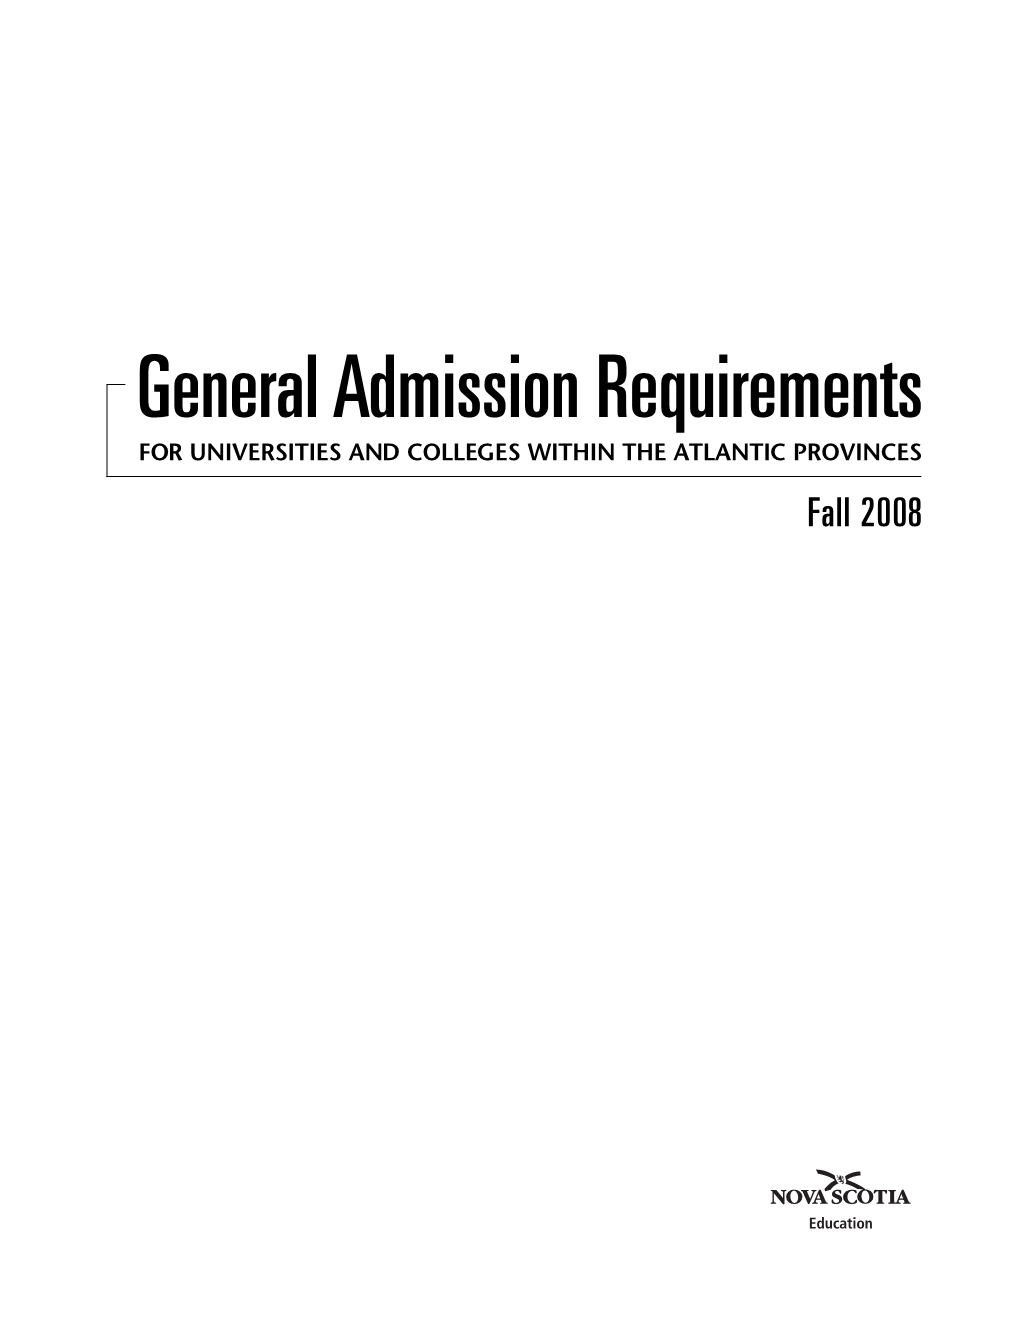 General Admission Requirements for UNIVERSITIES and COLLEGES WITHIN the ATLANTIC PROVINCES Fall 2008